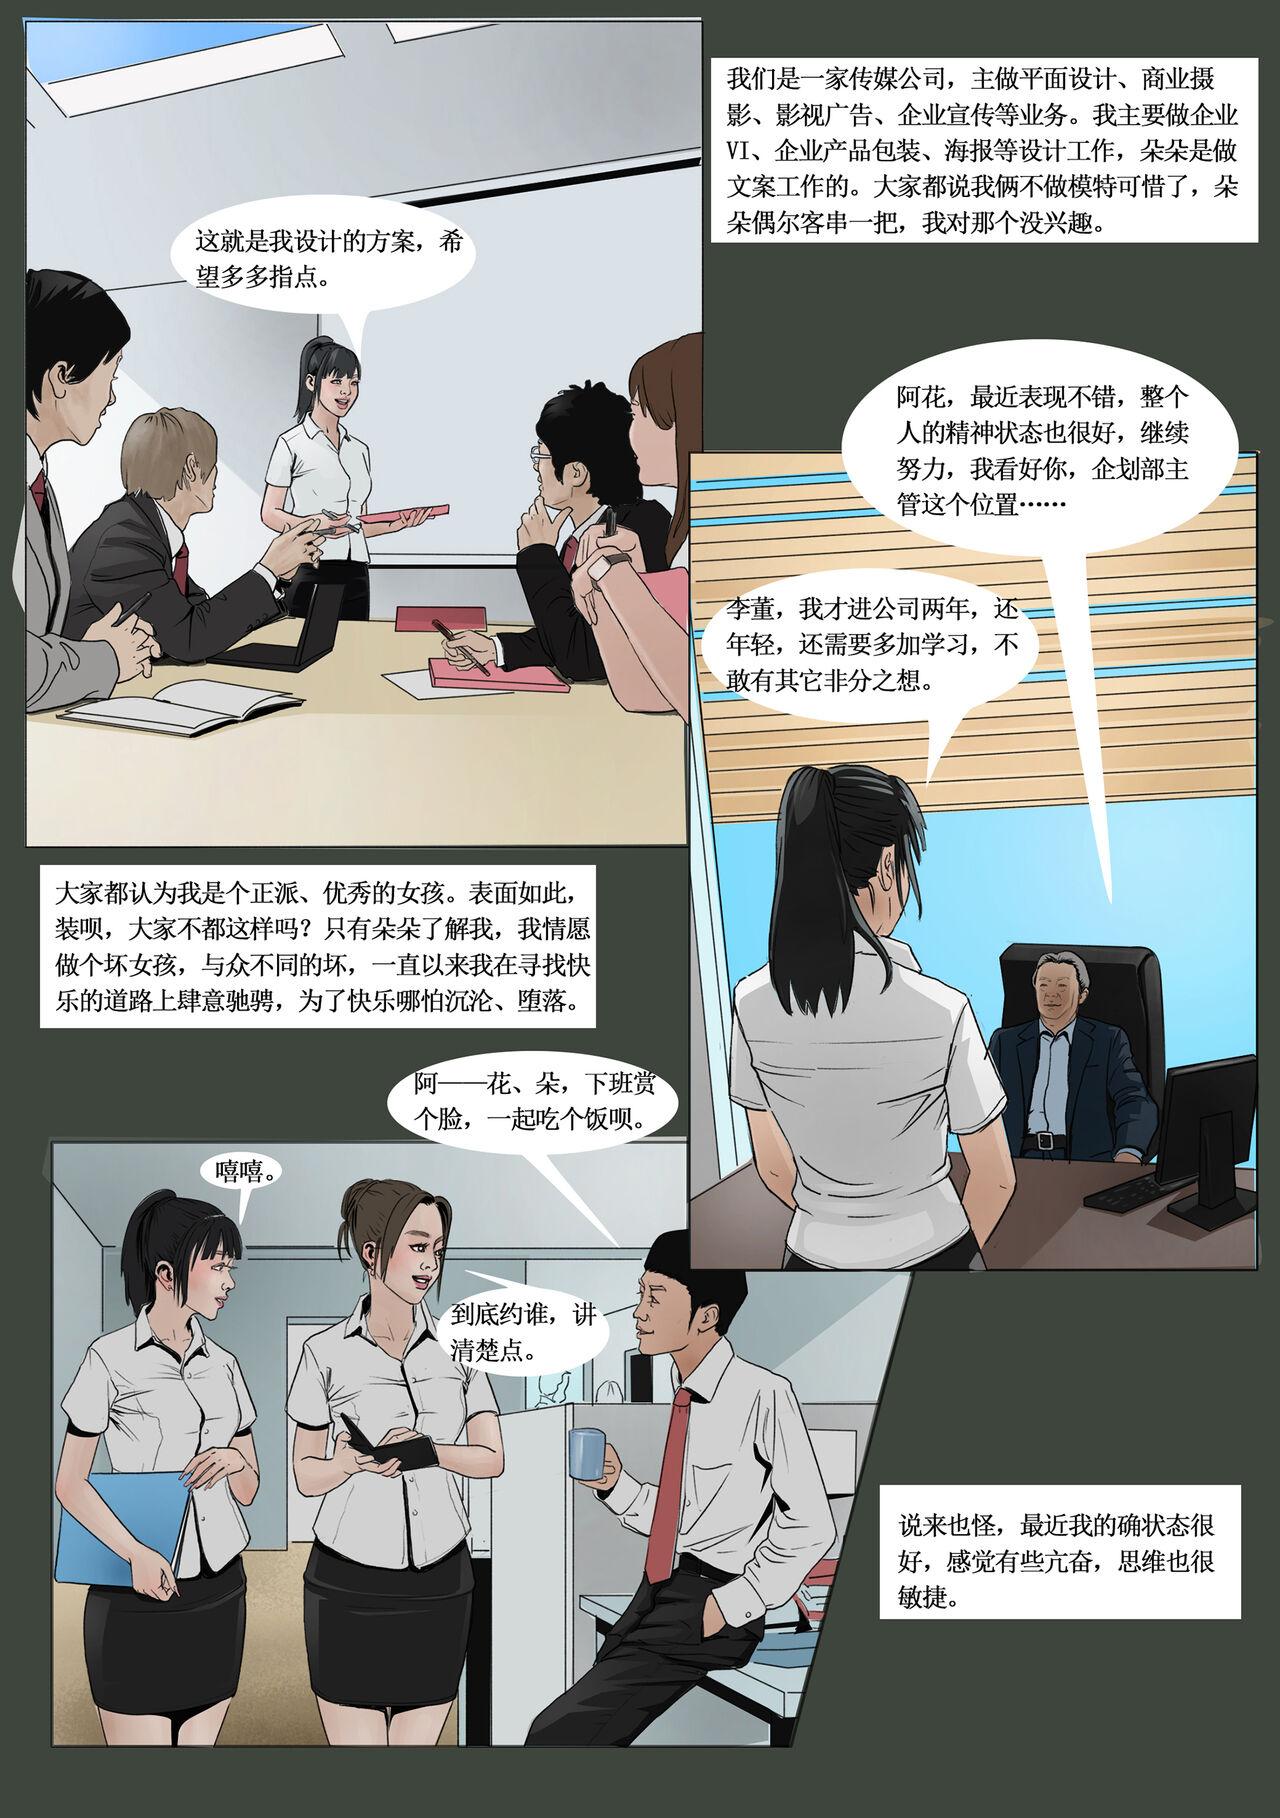 Dick Sucking 枫语Foryou《阿花与阿朵》第二话 A hua and A duo 2 Chinese Tribute - Page 10